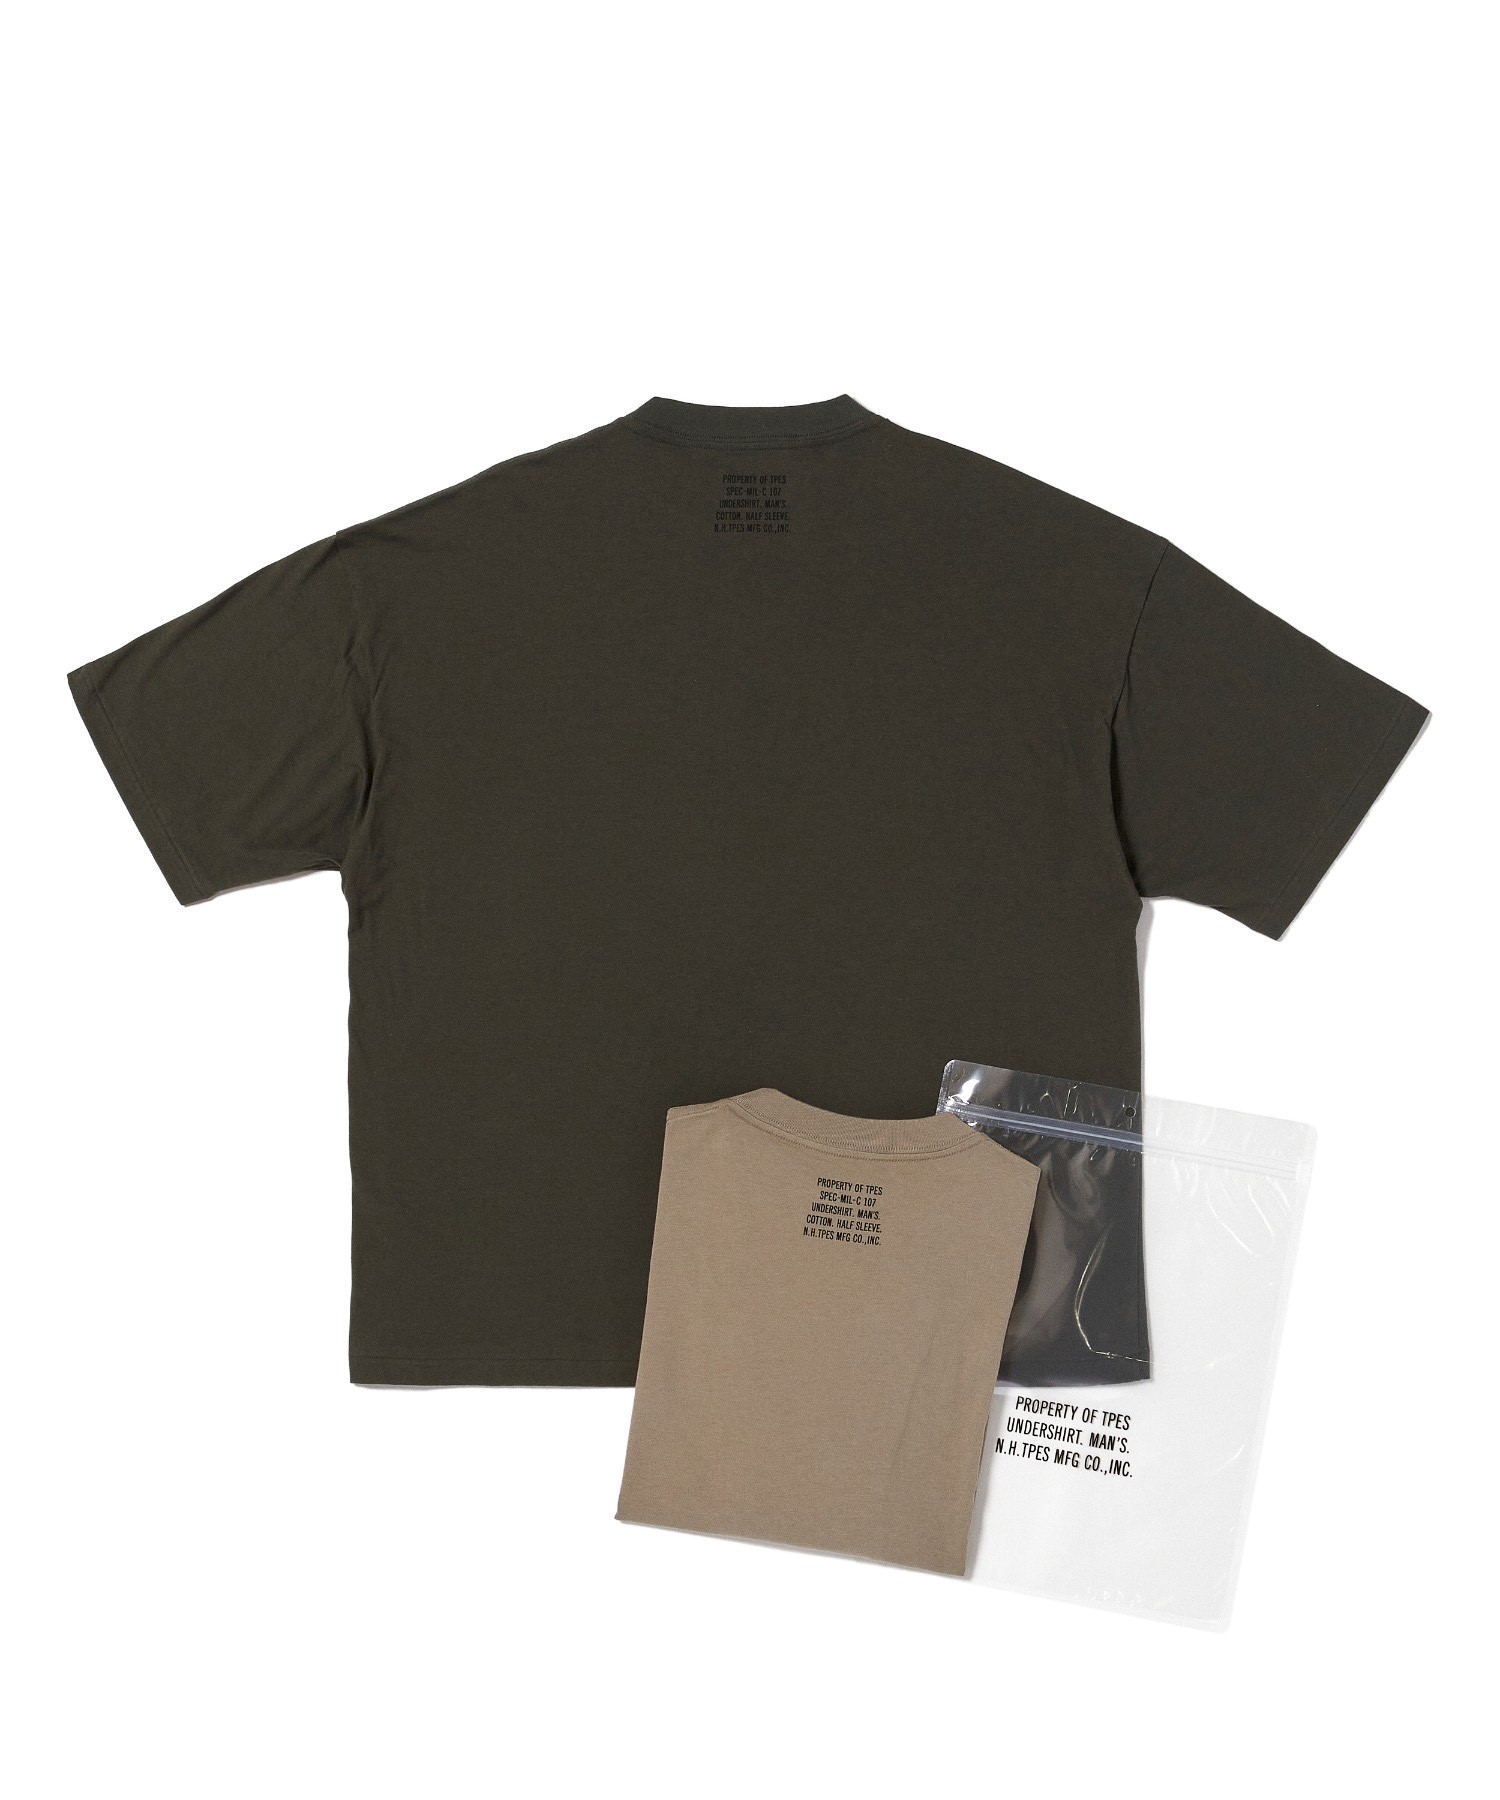 【N.HOOLYWOOD TEST PRODUCT EXCHANGE SERVICE】-2PACK T-SHIRT-